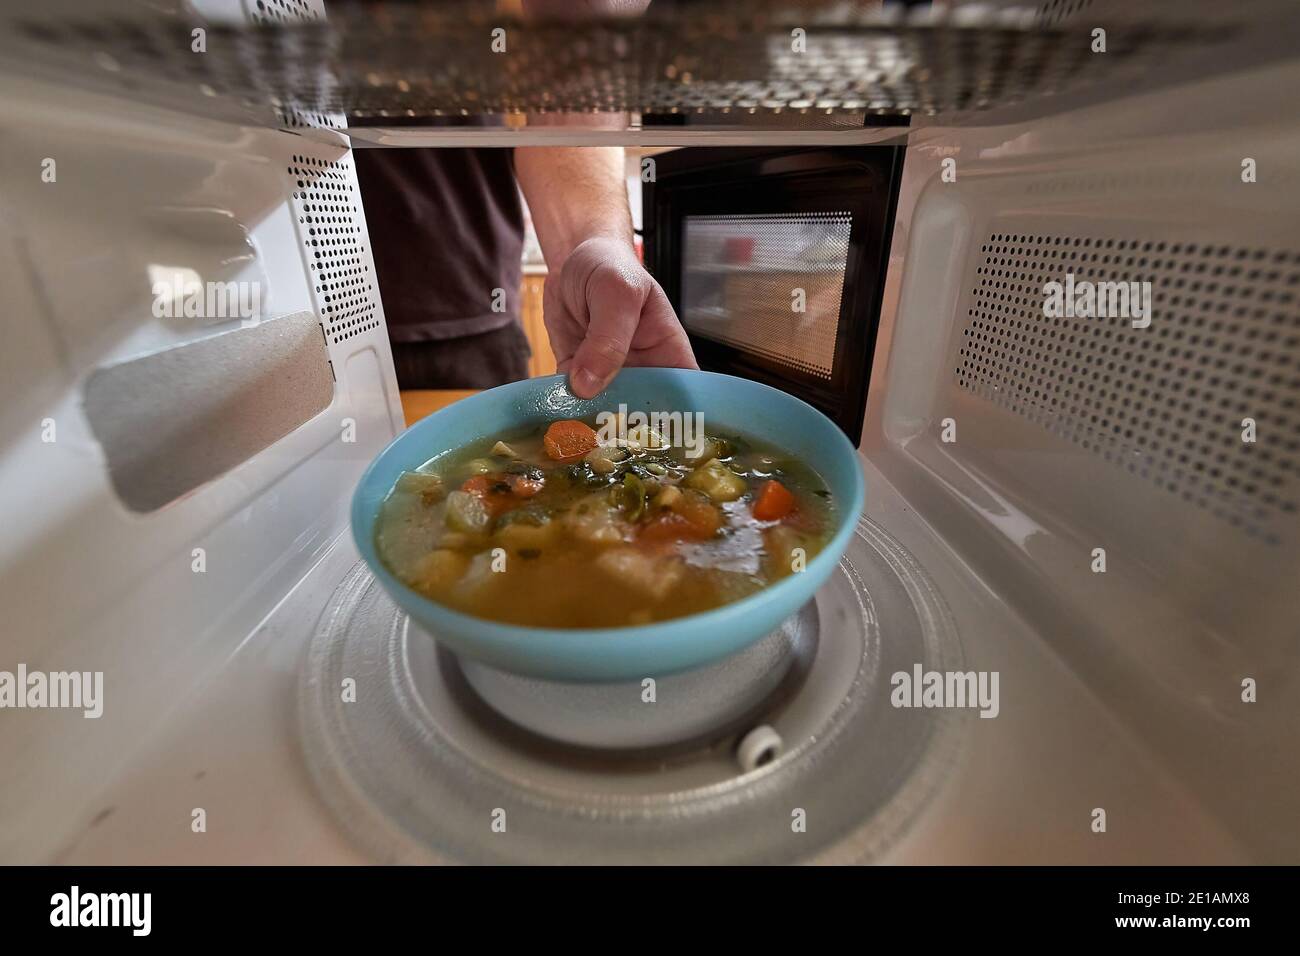 Heating food in a microwave oven Stock Photo